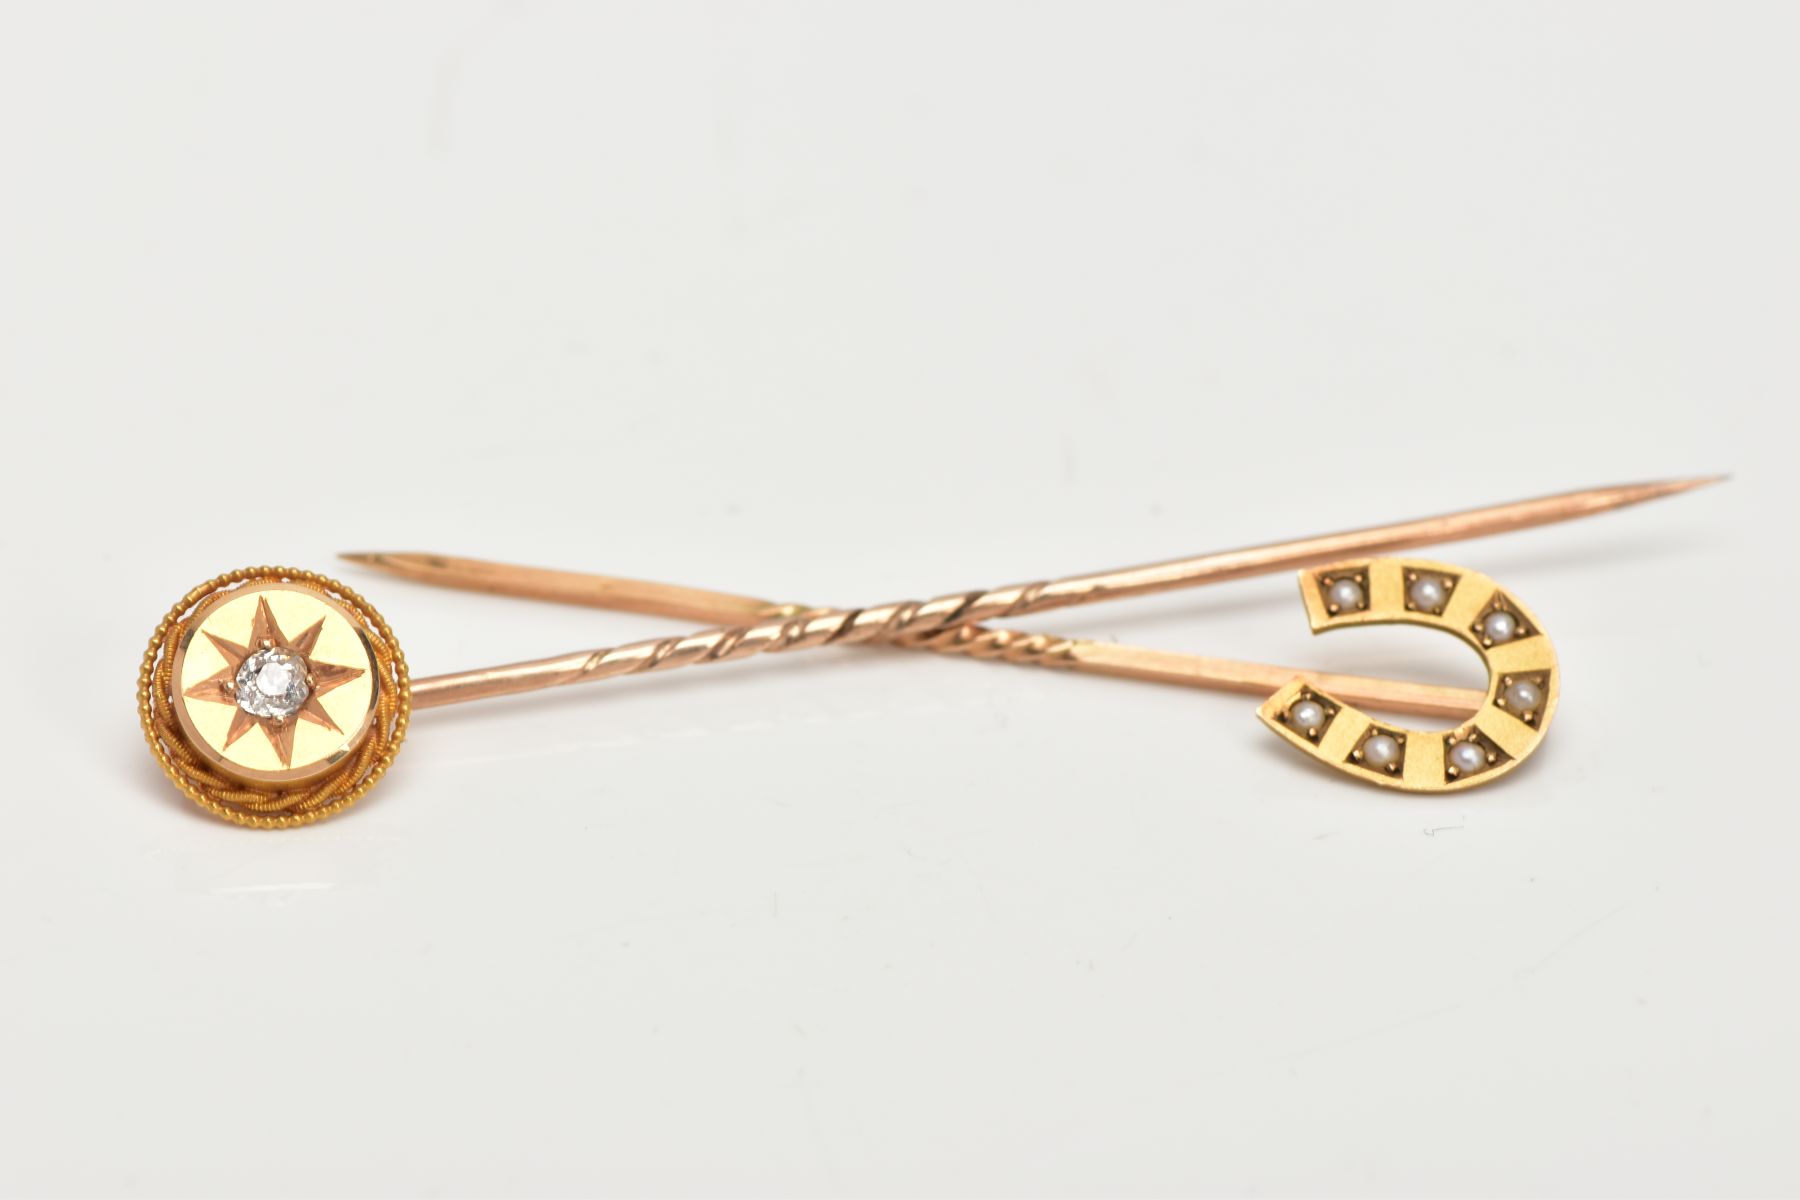 TWO GOLD STICK PINS, one stick pin featuring a horse shoe design set with seven seed pearls, - Image 2 of 3